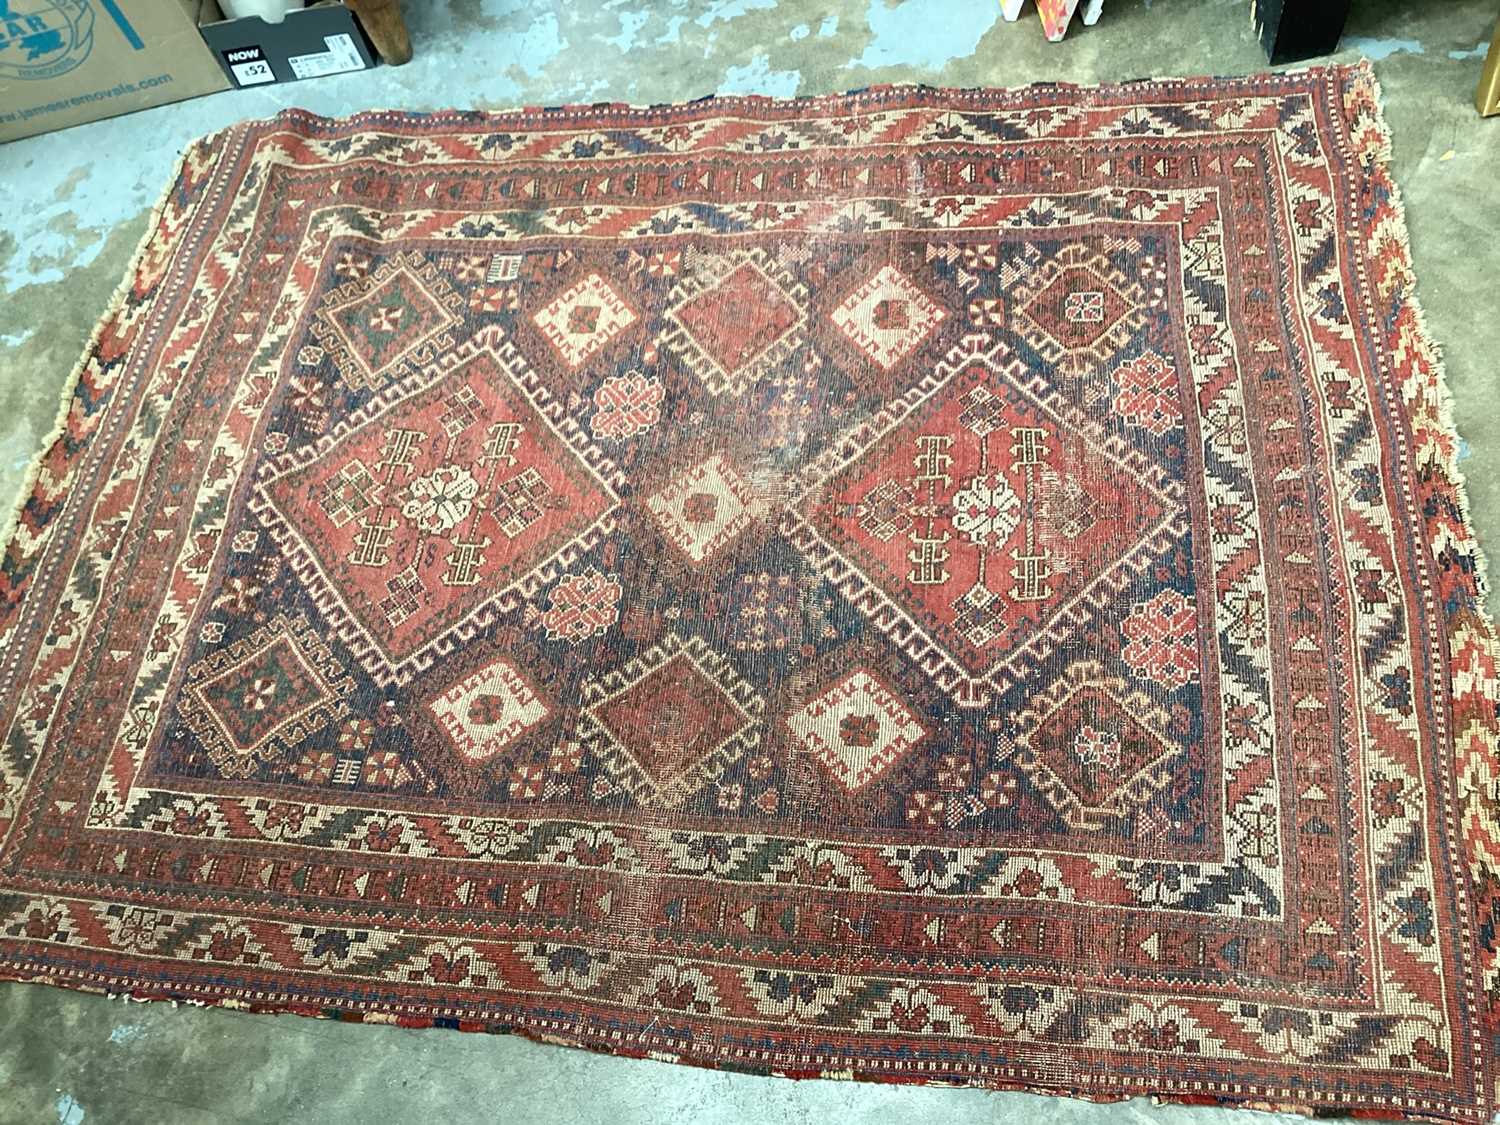 Two Eastern rugs with geometric decoration on red and blue ground, 175cm x 128cm - Image 3 of 6